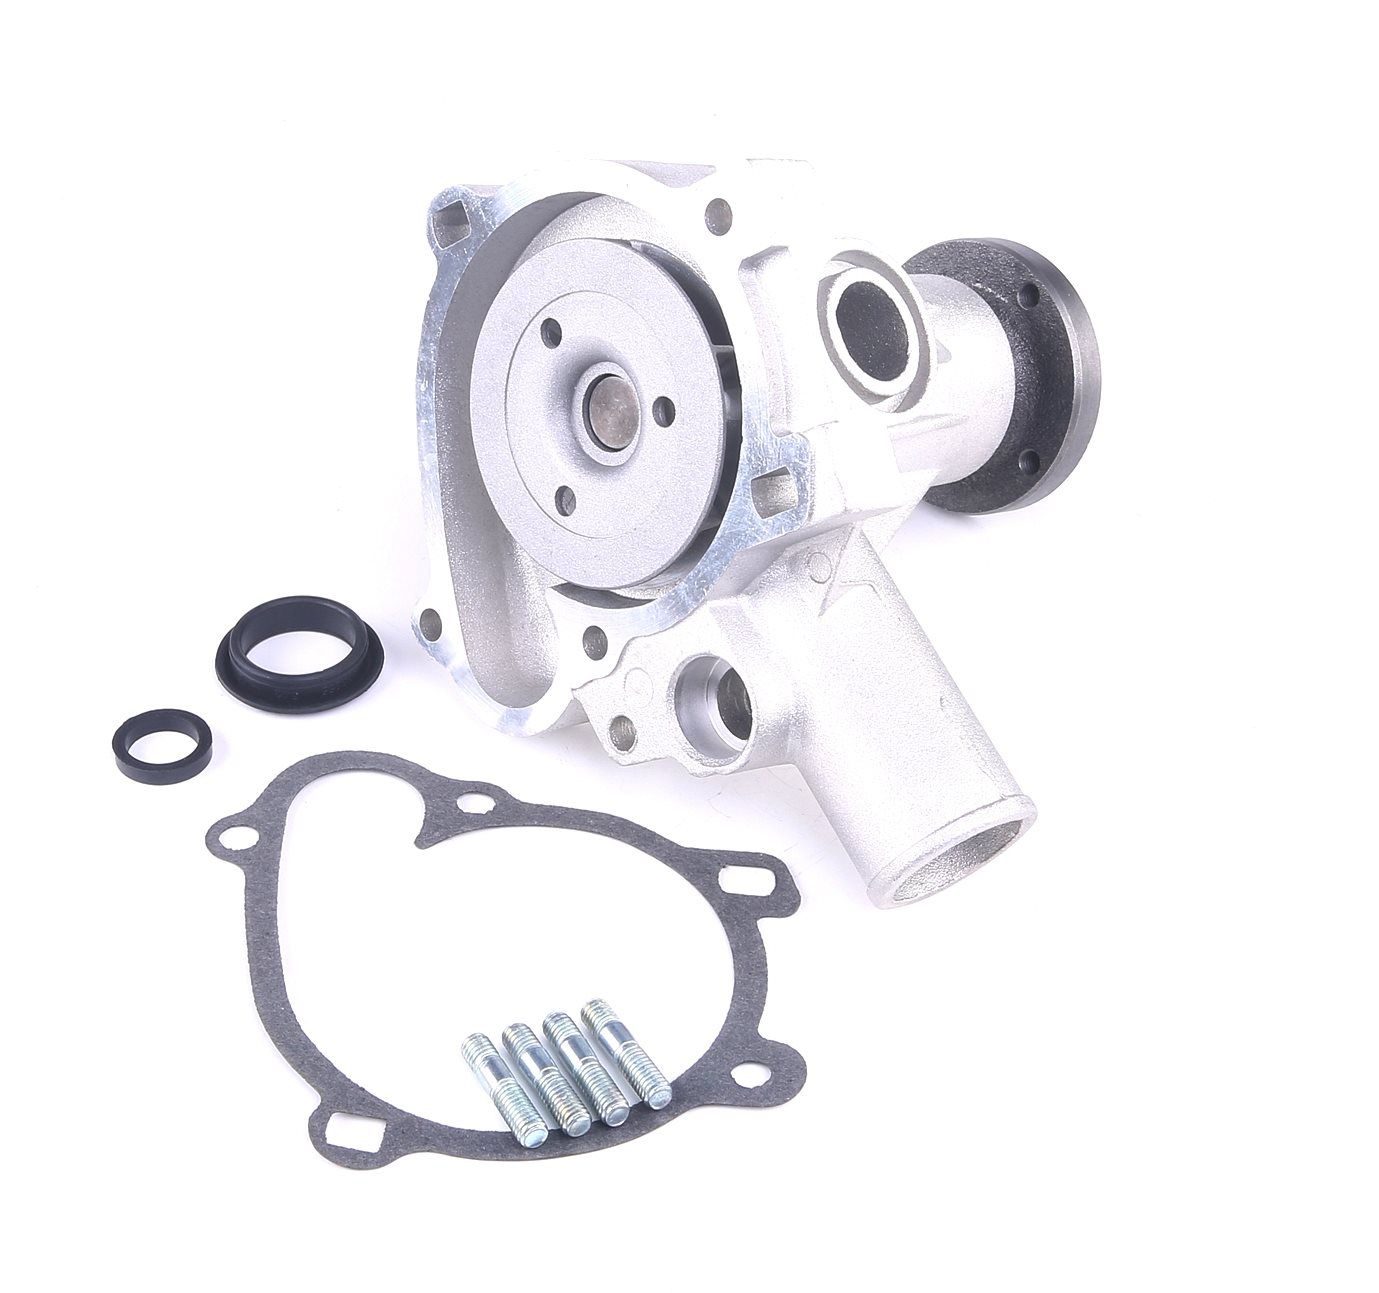 STARK SKWP-0520037 Water pump Cast Aluminium, without belt pulley, with gaskets/seals, with screw set, Mechanical, Aluminium